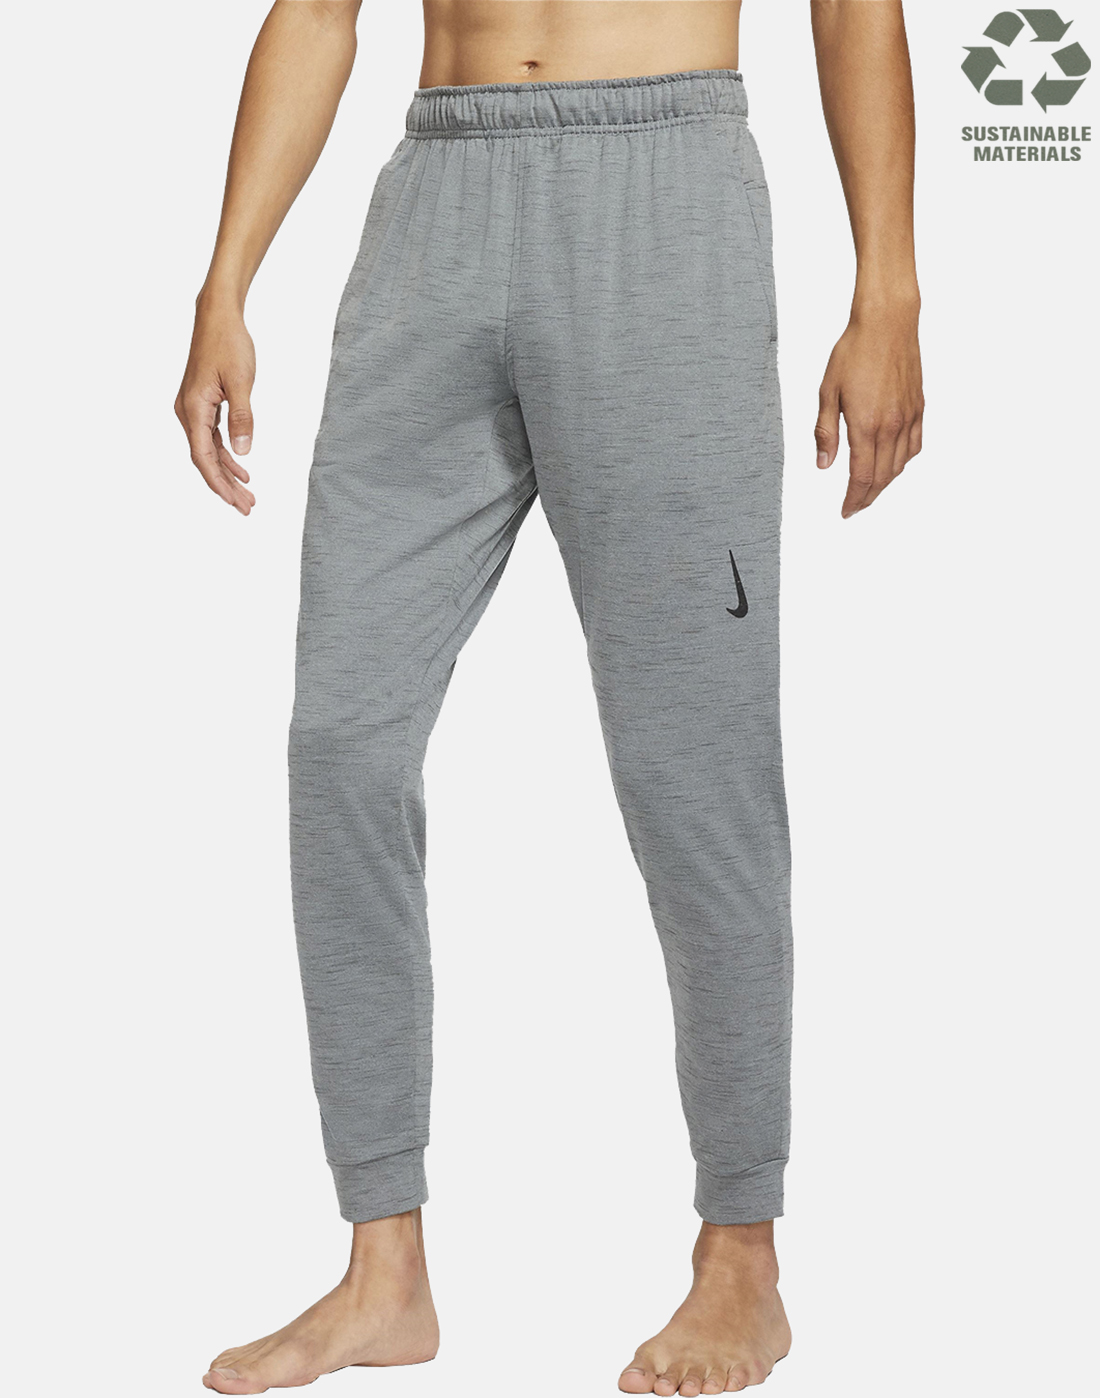 Nike Mens Dry Yoga Pant - Grey | Life Style Sports IE